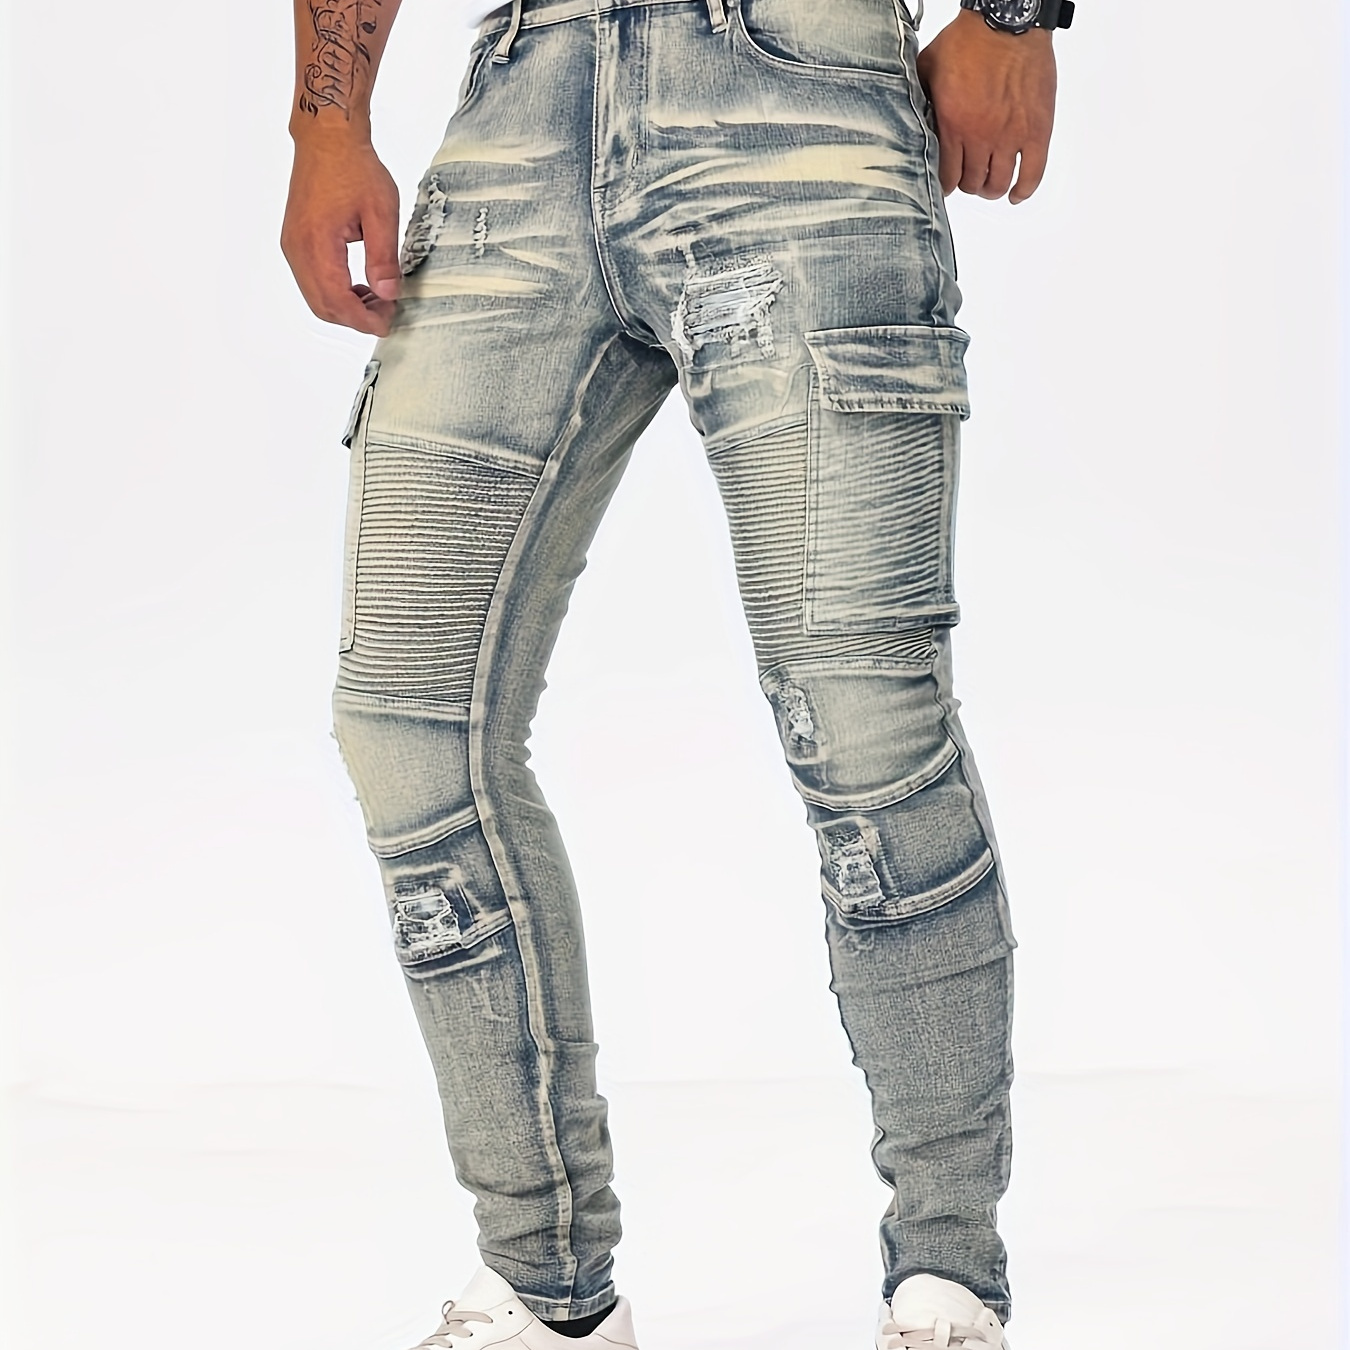 

Men's Vintage Style Skinny Fit Denim Pants, Street Style Stylish Leisure Jeans For Males